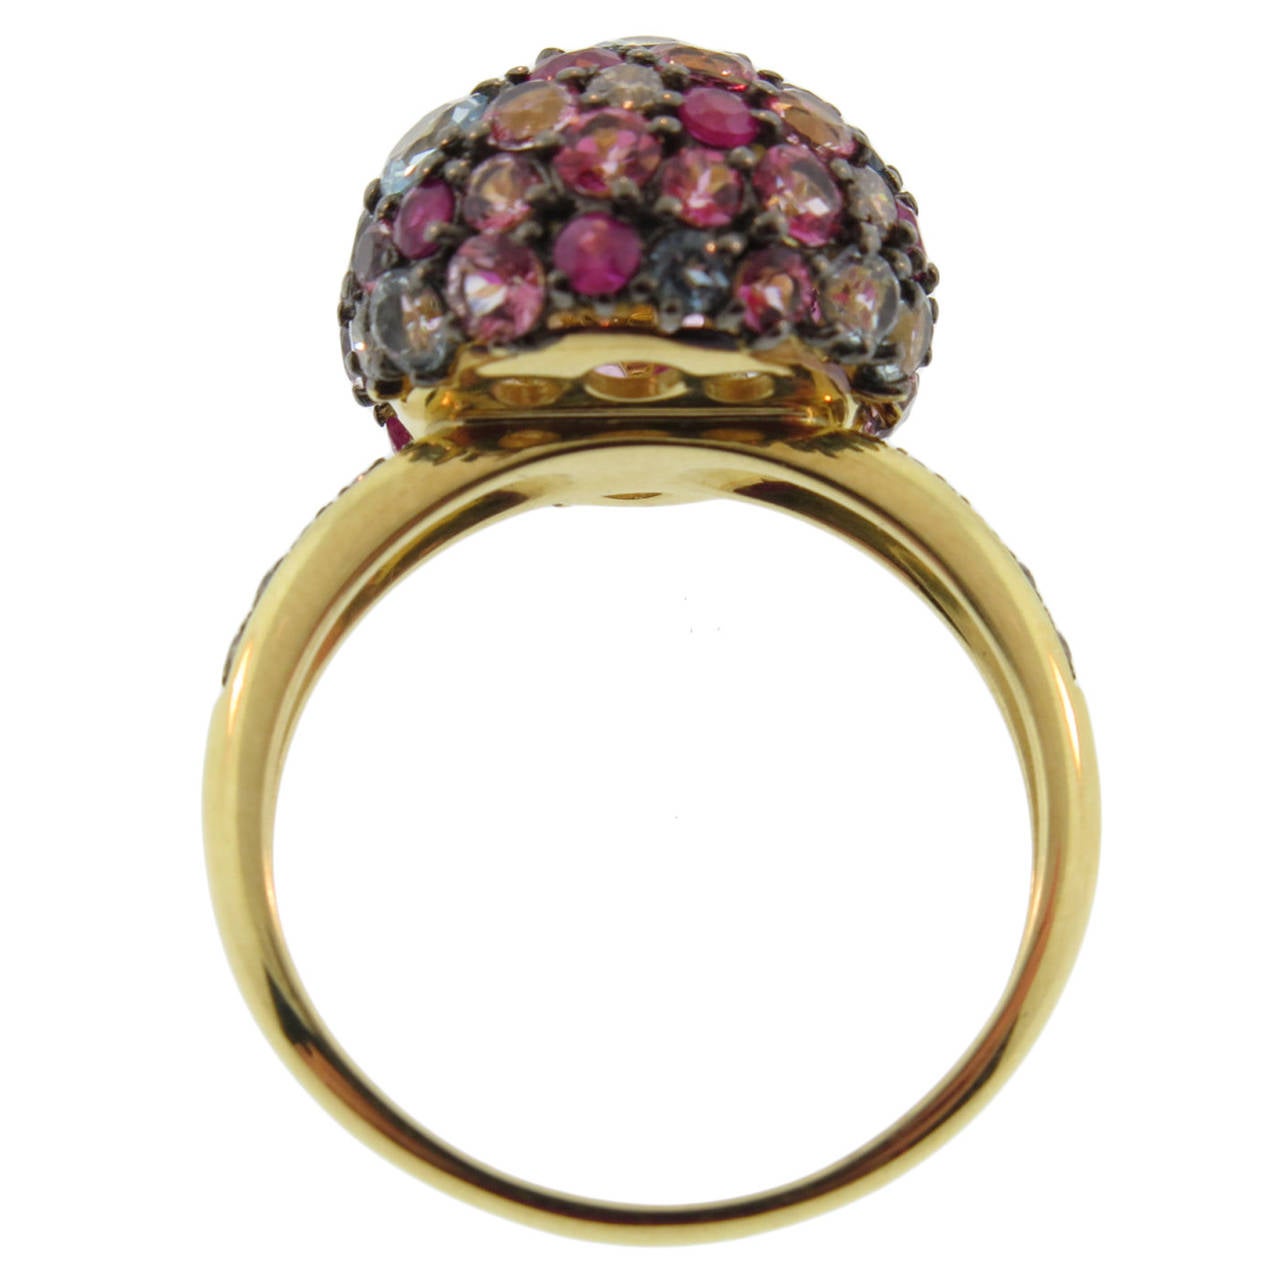 18 Karat Ruby, Topaz and Sapphires Pave Ball Ring by Brumani